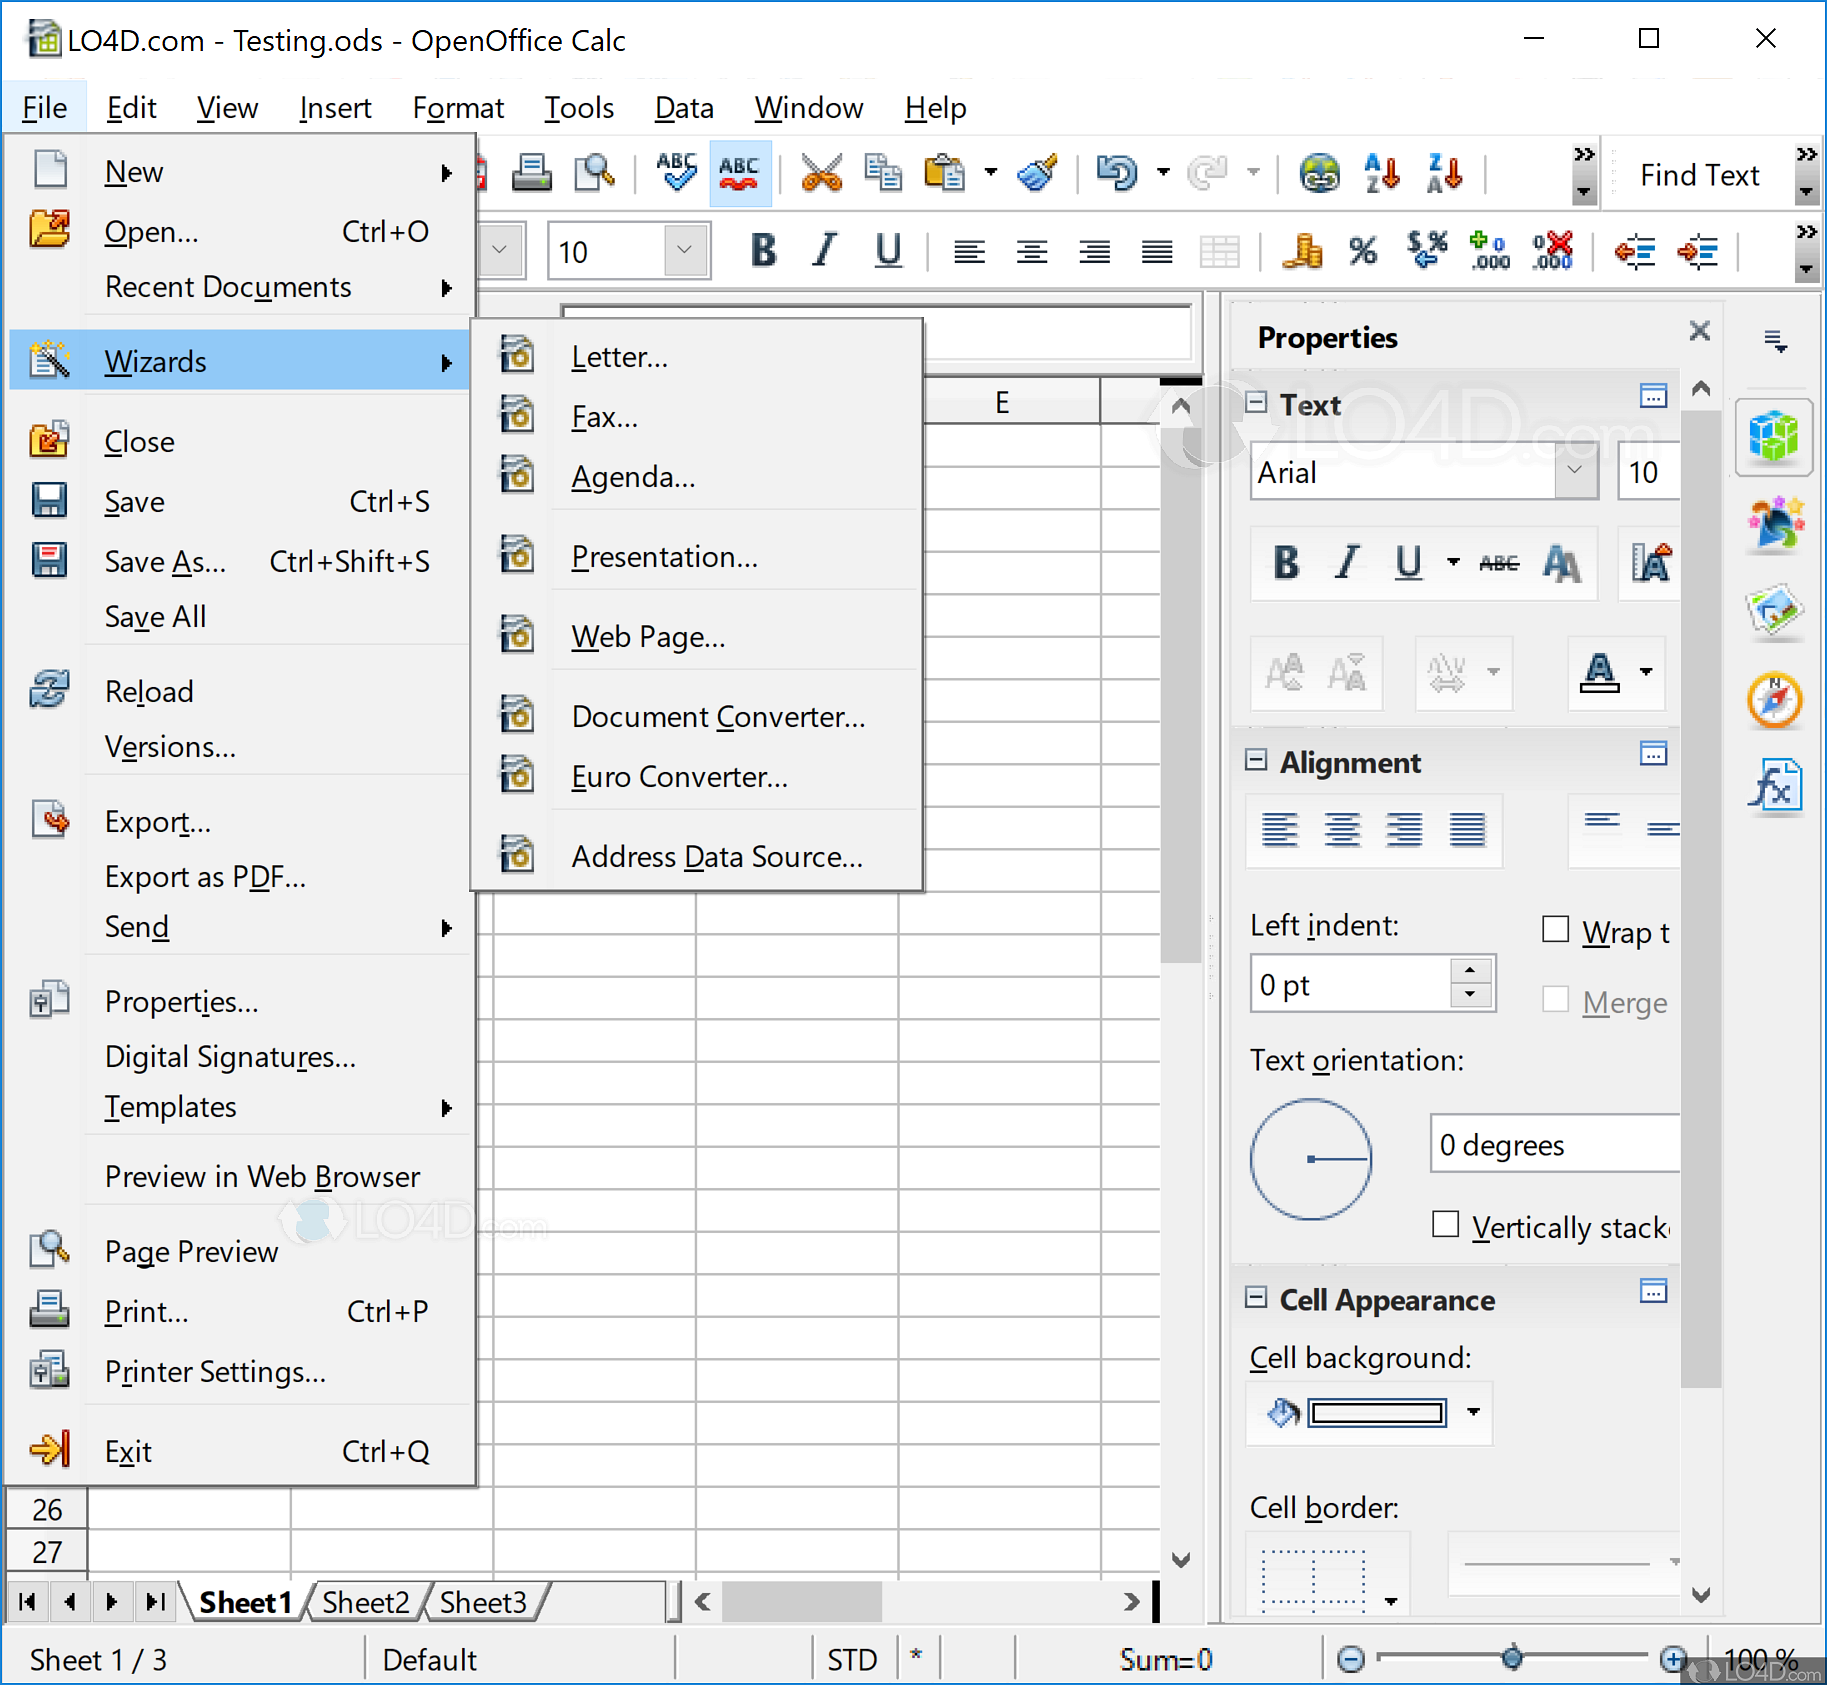 open office free download for windows